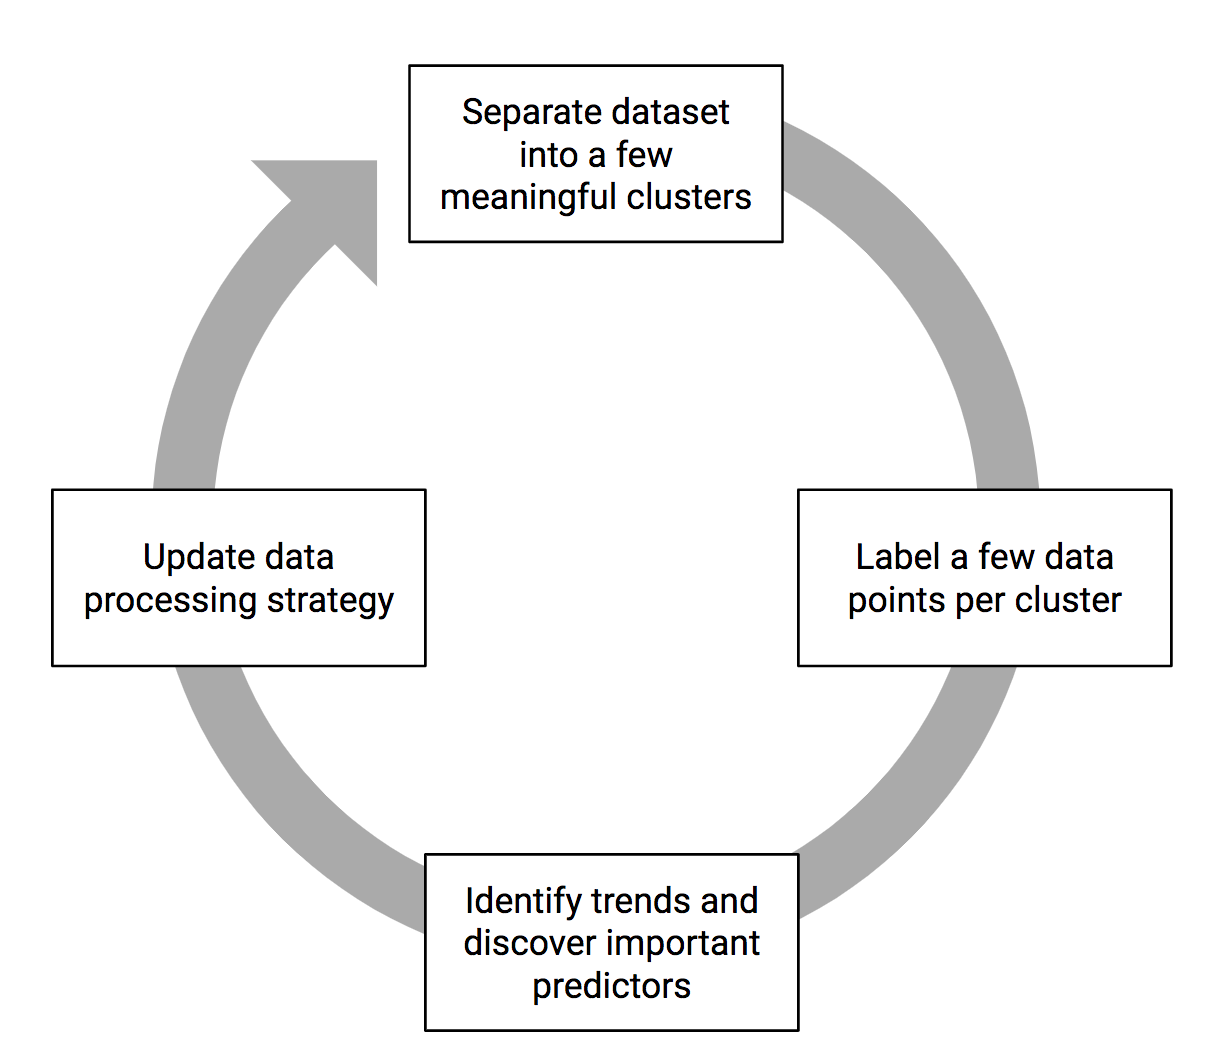 The process of labeling data.